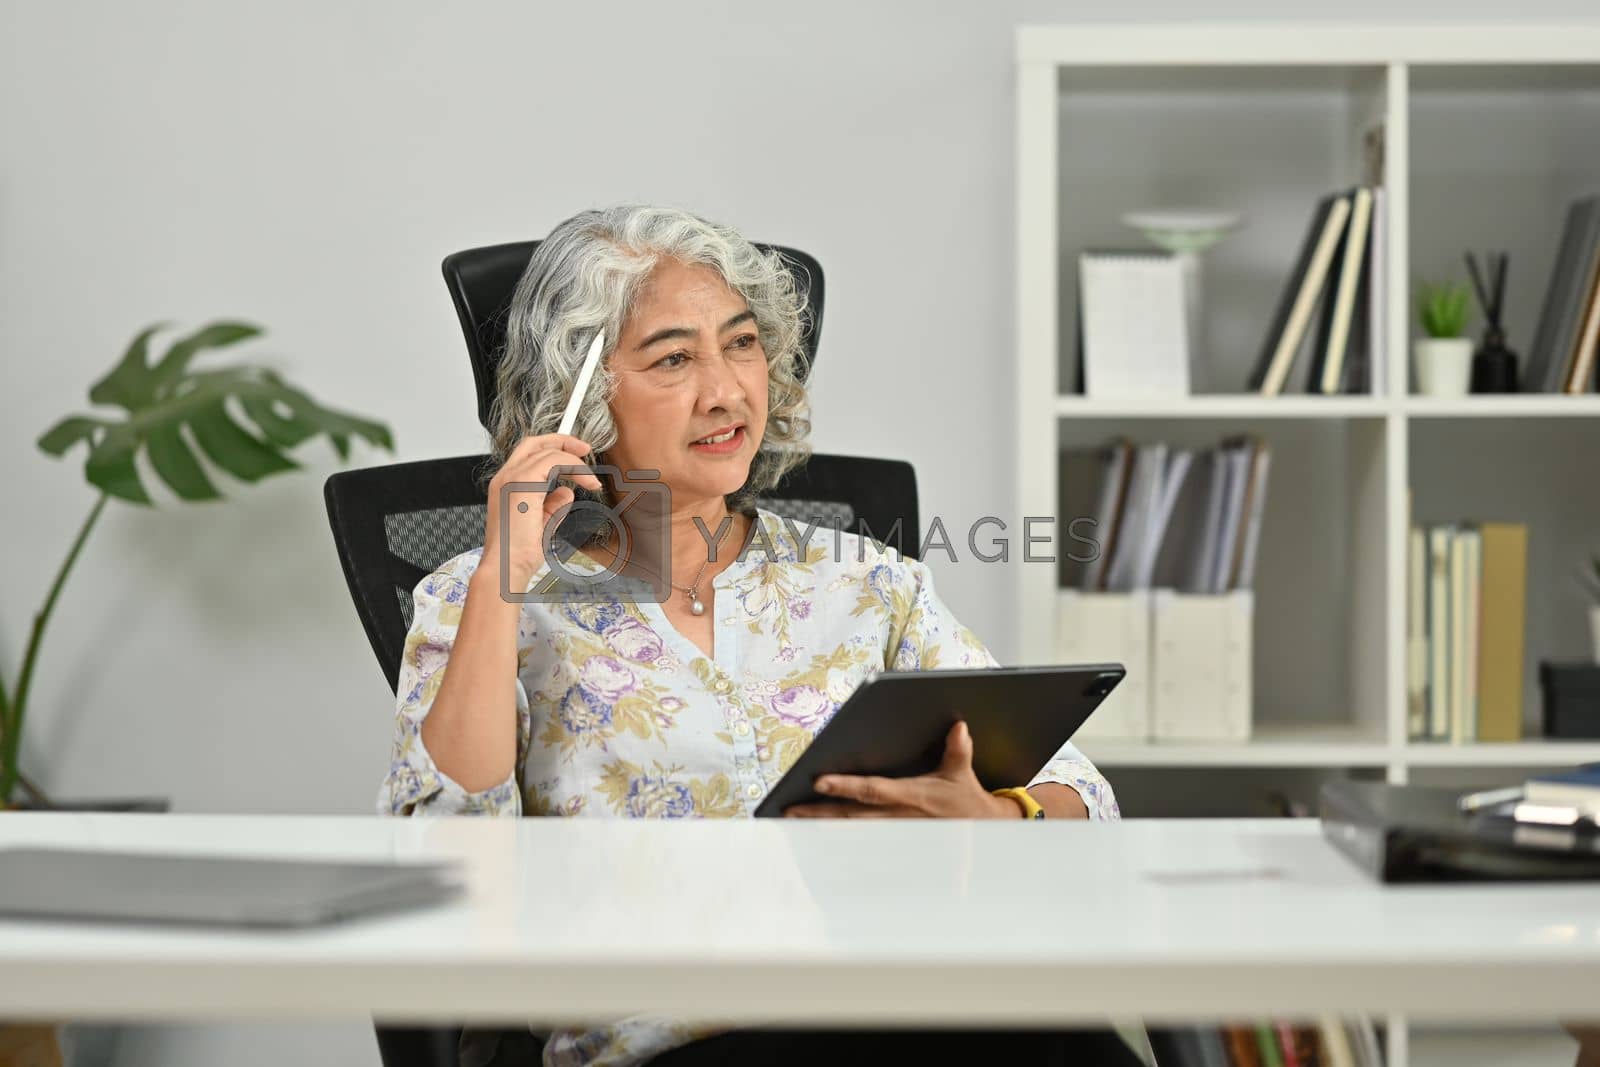 Royalty free image of Thoughtful middle aged woman, daydreaming and looking away. Retirement, technology concept by prathanchorruangsak